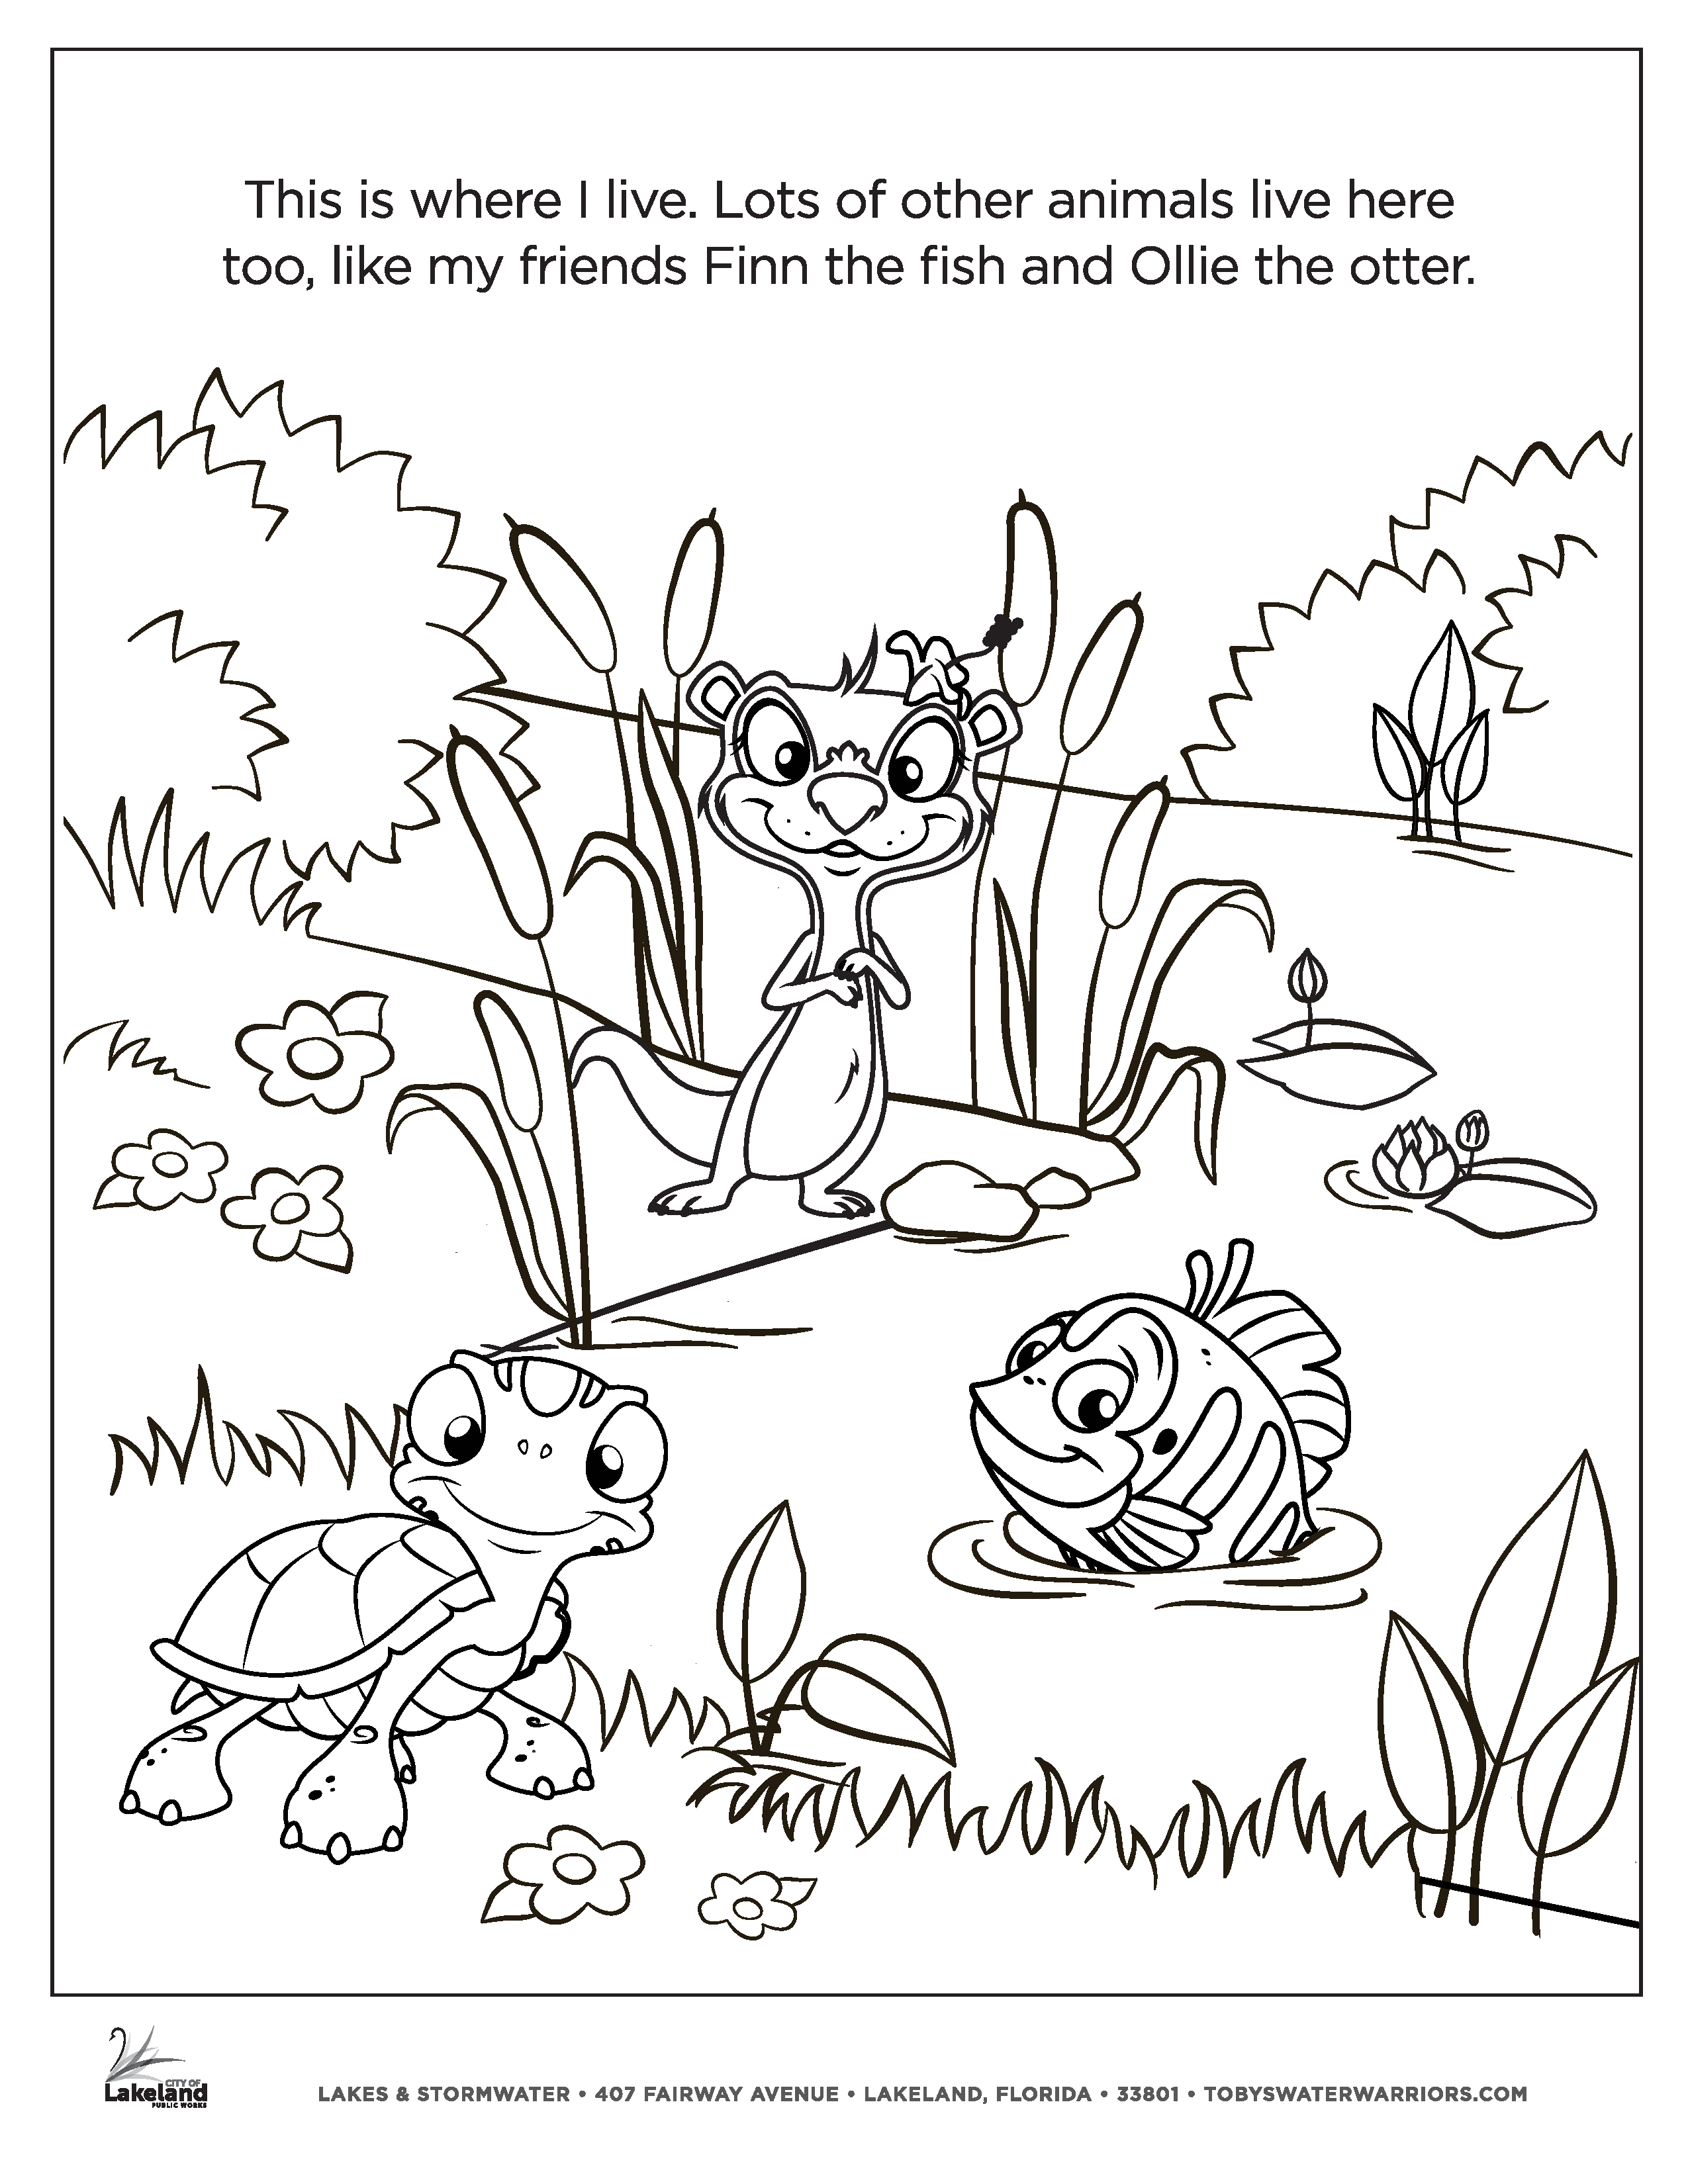 Toby's Water Warriors Coloring Page 3